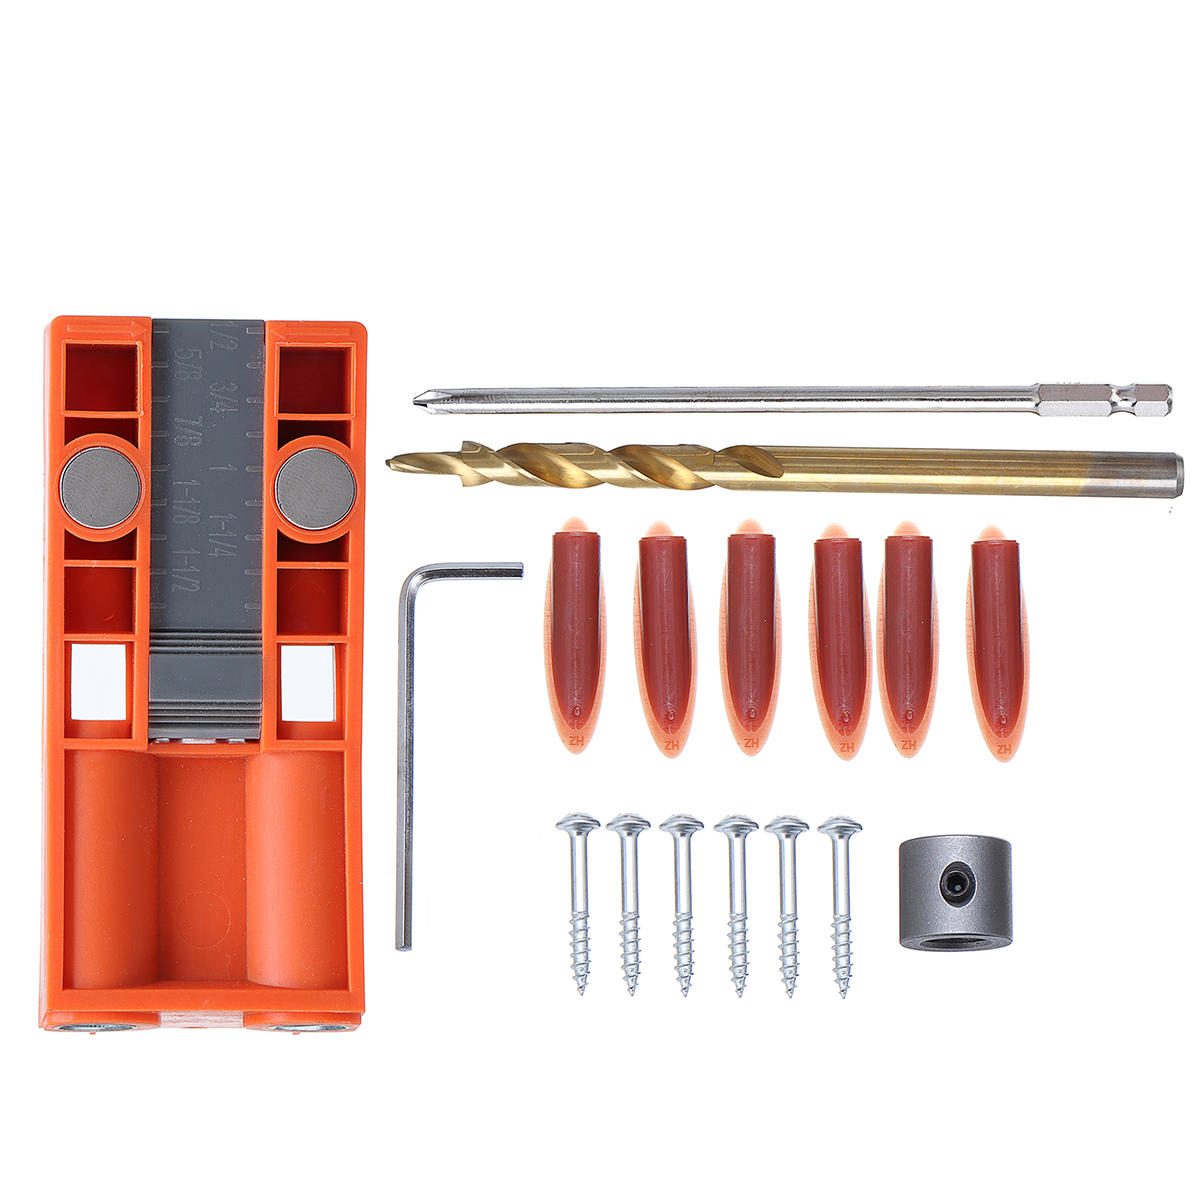 

Pocket Hole Jig System Drill Bit Wood Dowel Hole Drilling Guide Positioner Woodworking Tools